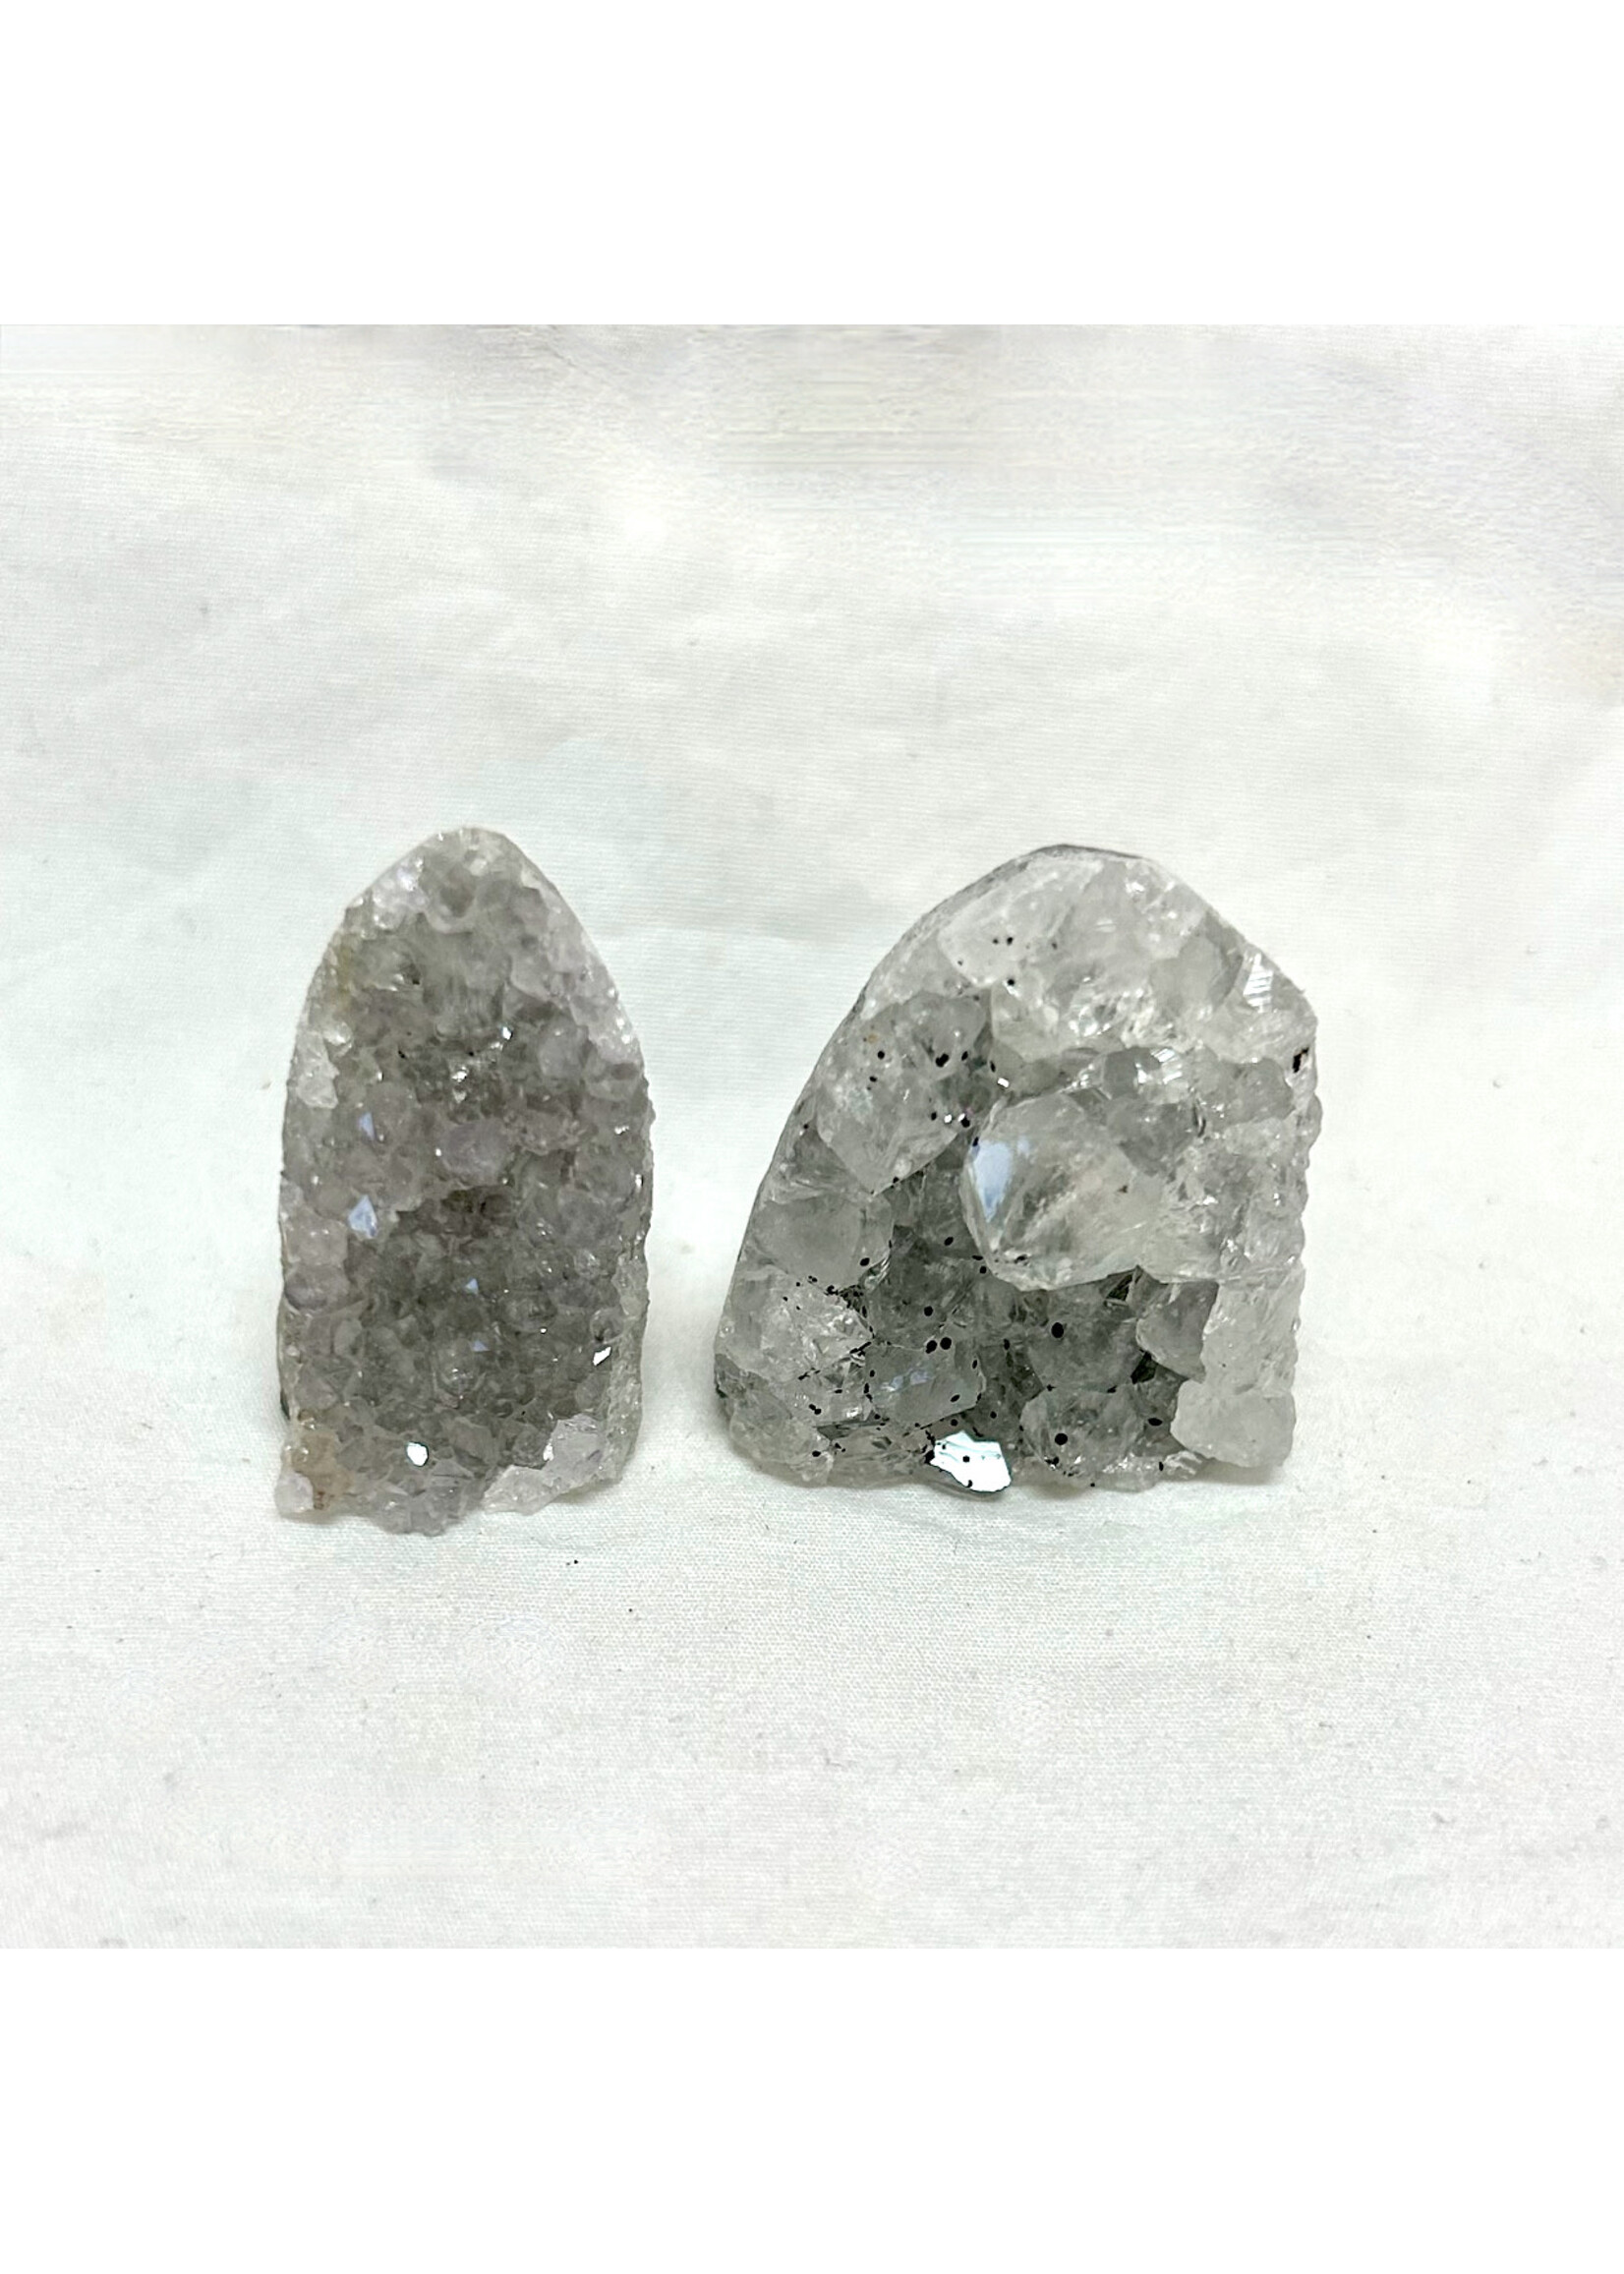 Mini Geodes for small spaces